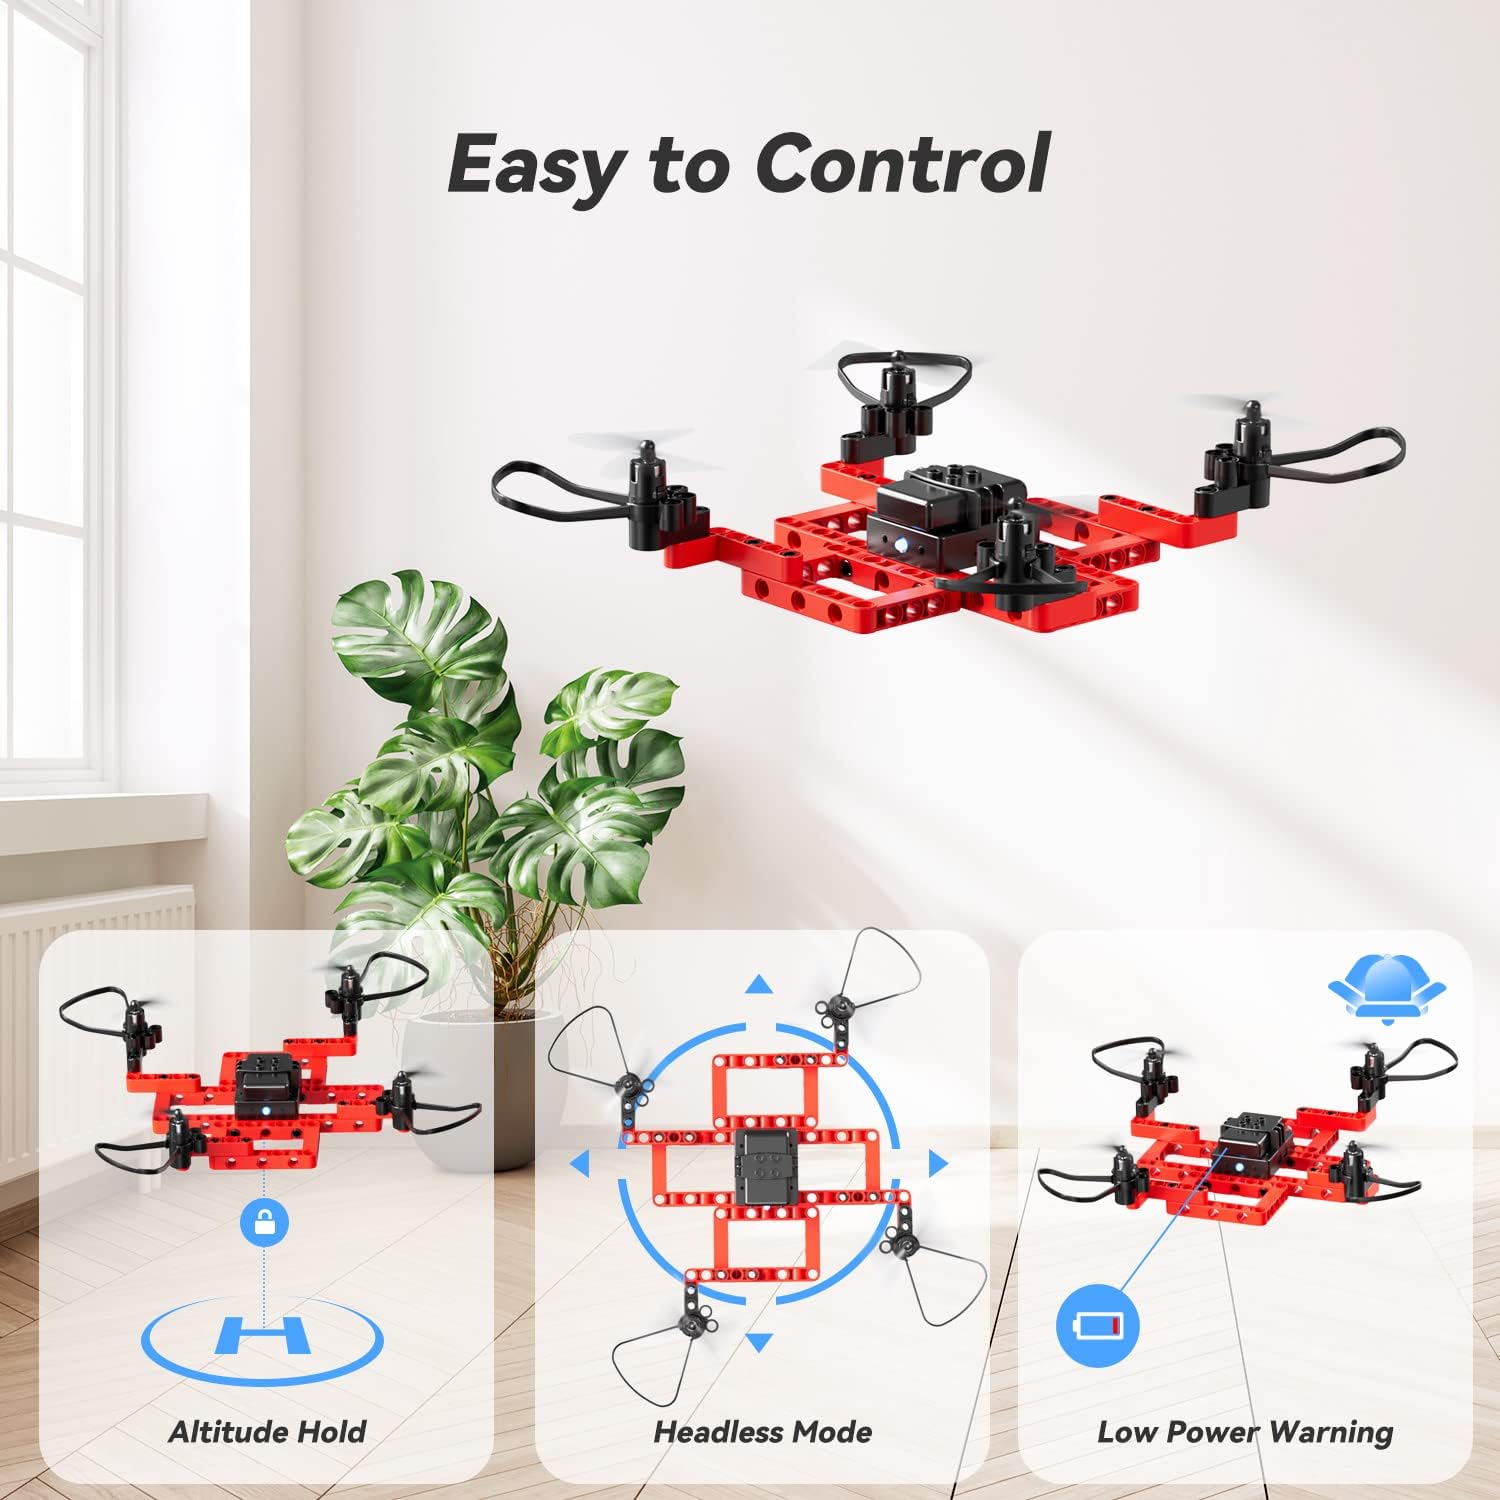 TECHVIO Drone for Kids, 5-IN-1 DIY Drone Building Kits, Mini Drone for Beginner with 3D Flips, Altitude Hold, Headless Mode,3 Speeds, Creative Educational Learning STEM Building Block Toy, Best Birthday Gifts for Boys Girls & Children